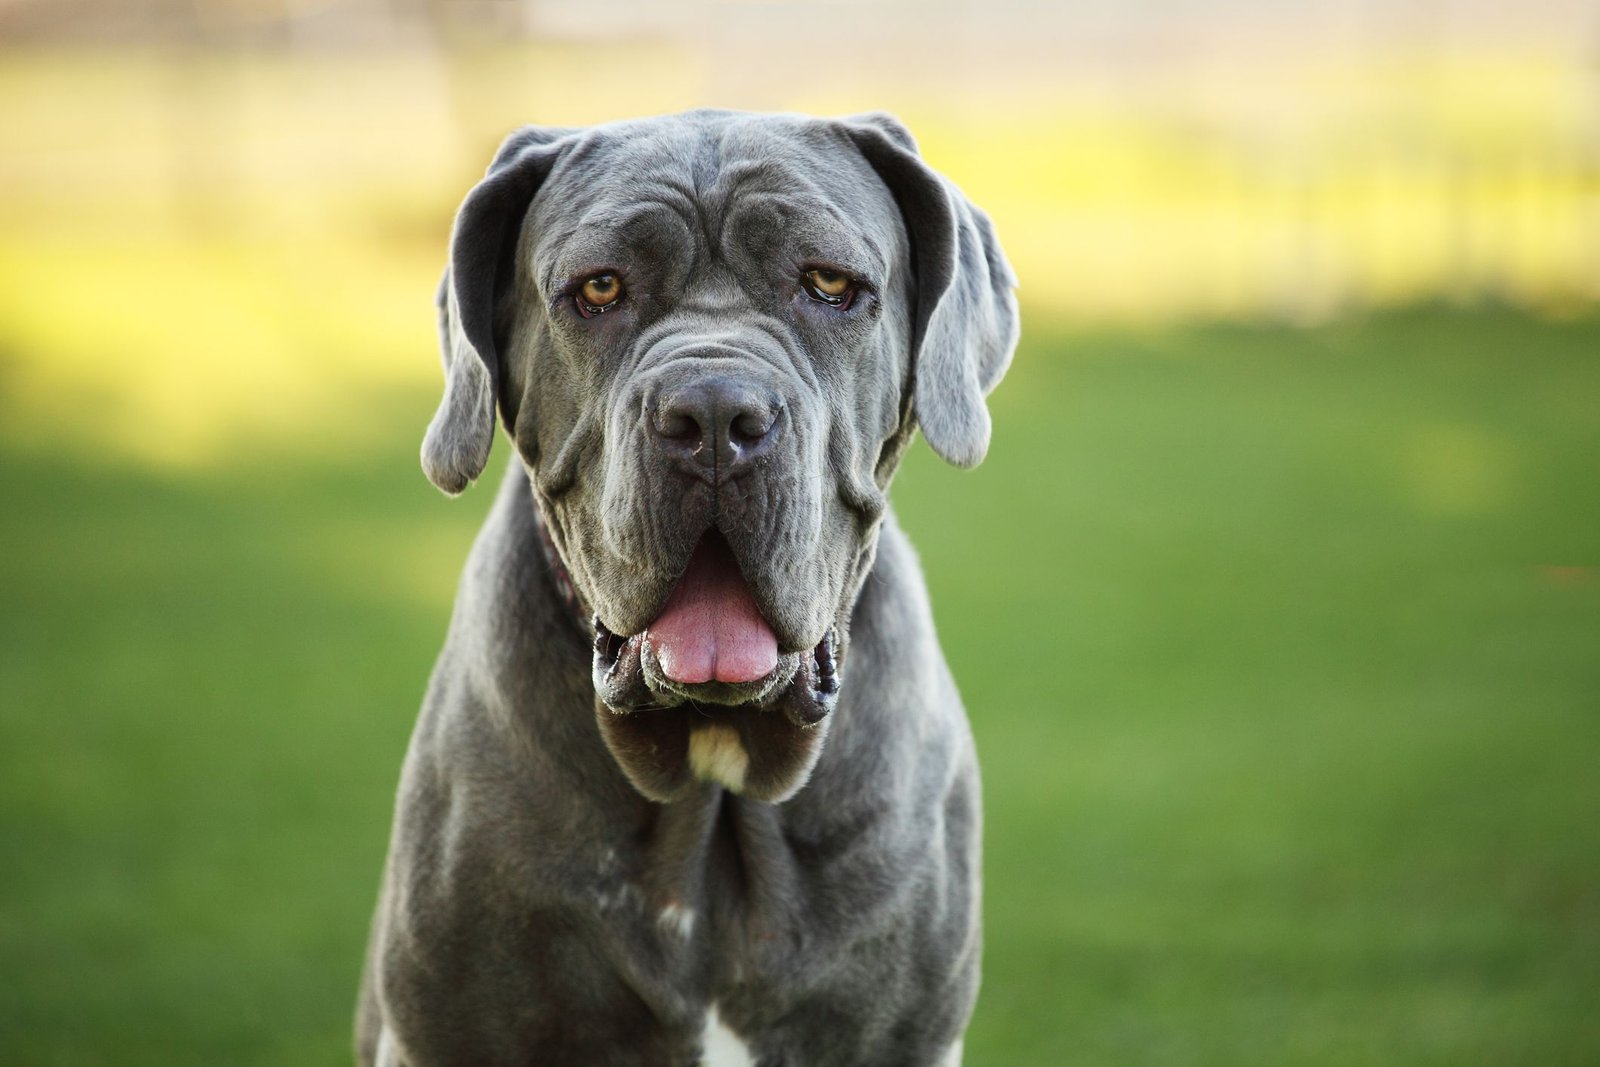 20 Blue Dog Breeds for Lovers of This Unique Color